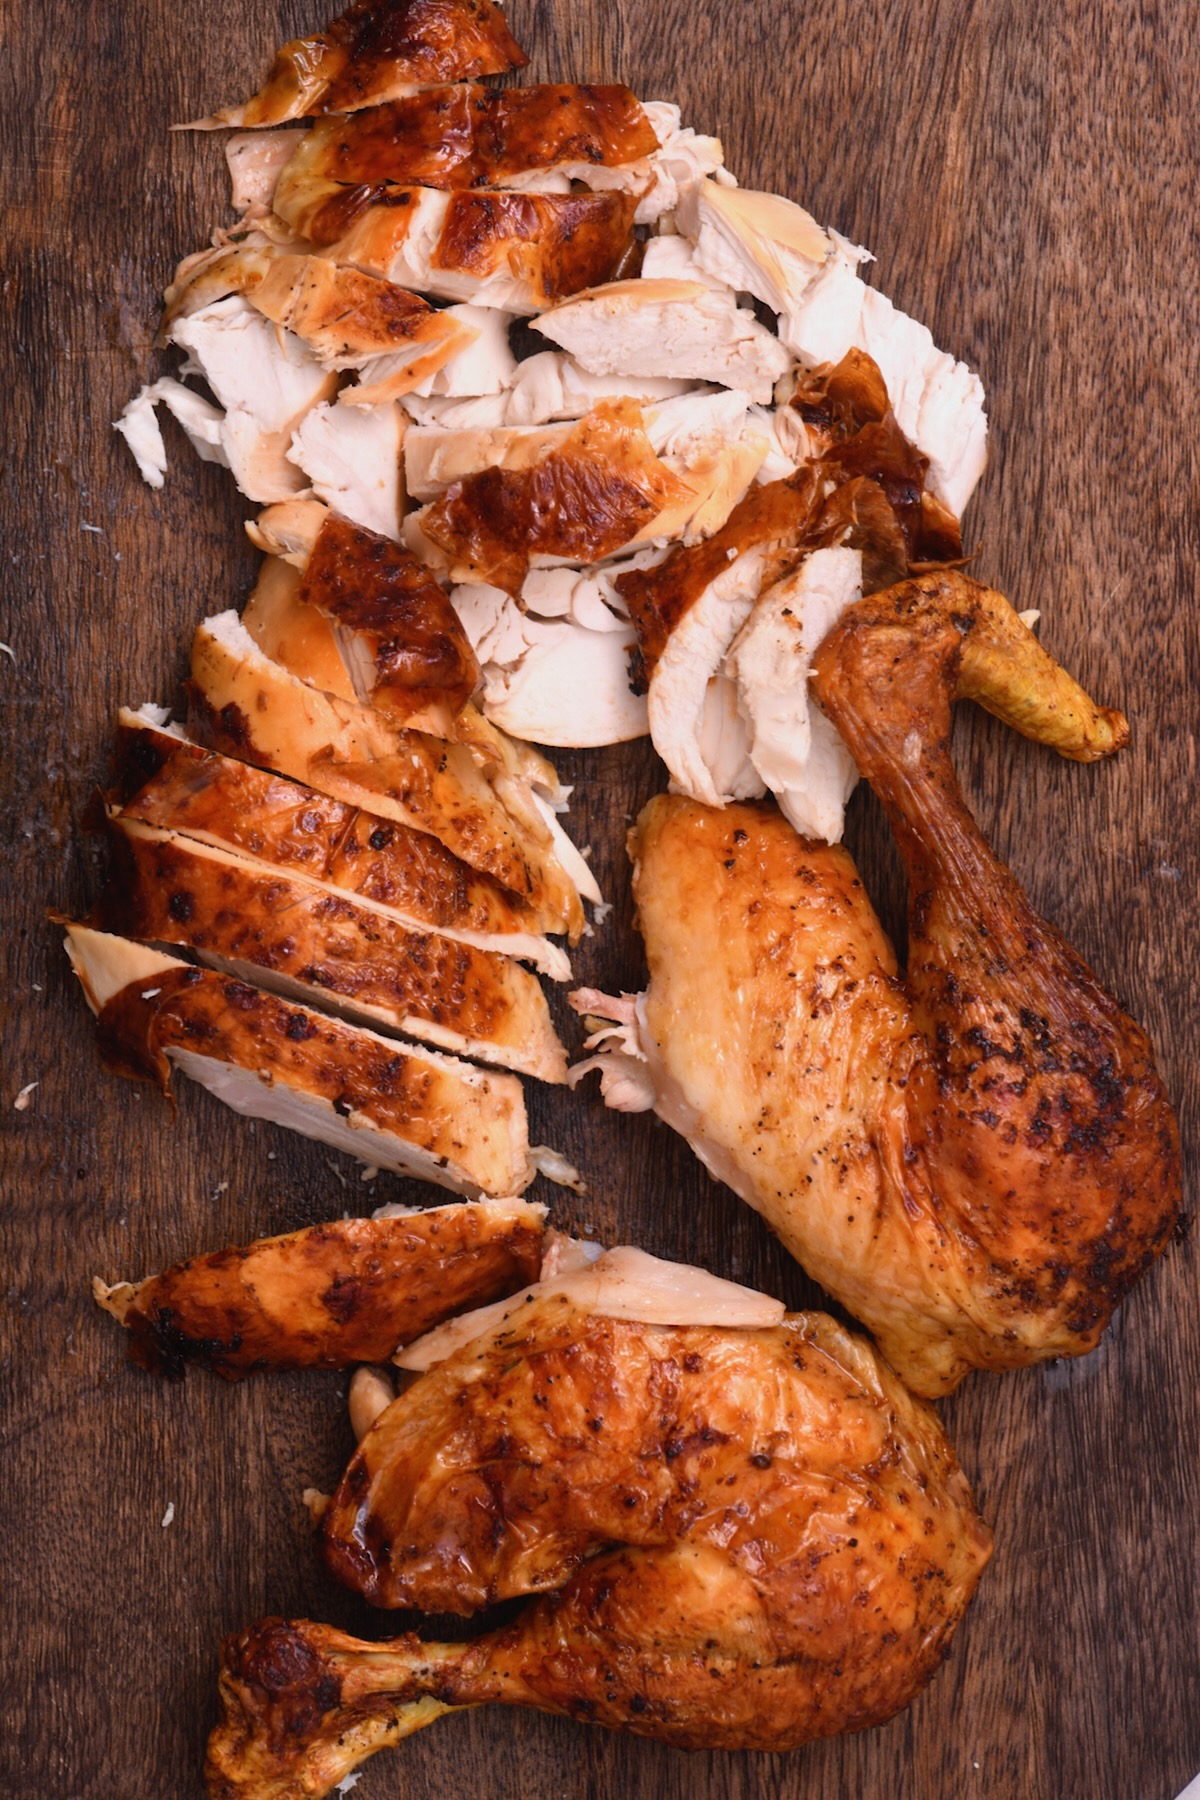 Carved oven roasted chicken on a cutting board